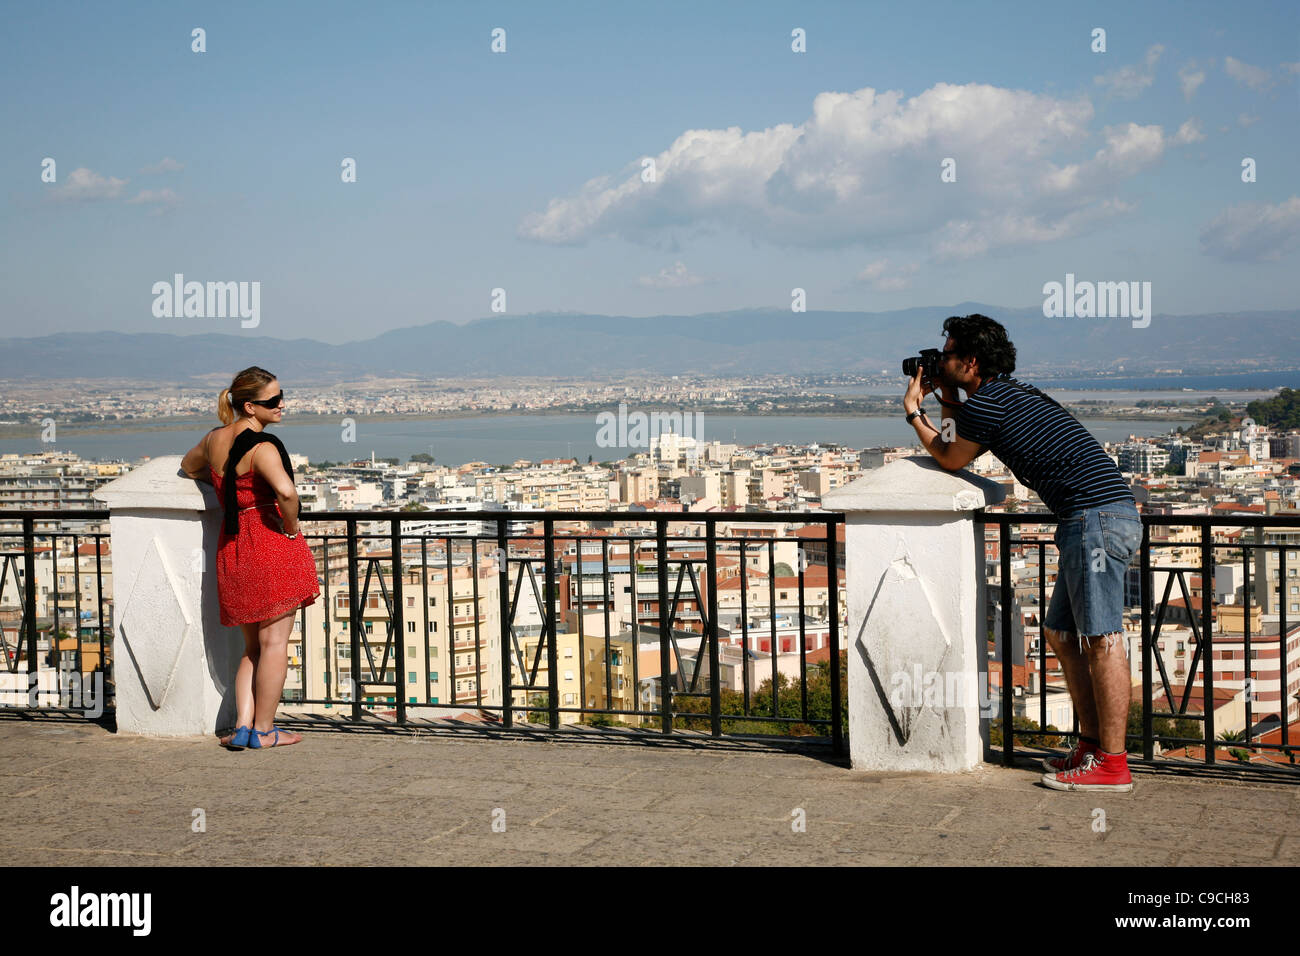 Couple in the Castello district with a view over the city. Cagliari, Sardinia, Italy. Stock Photo